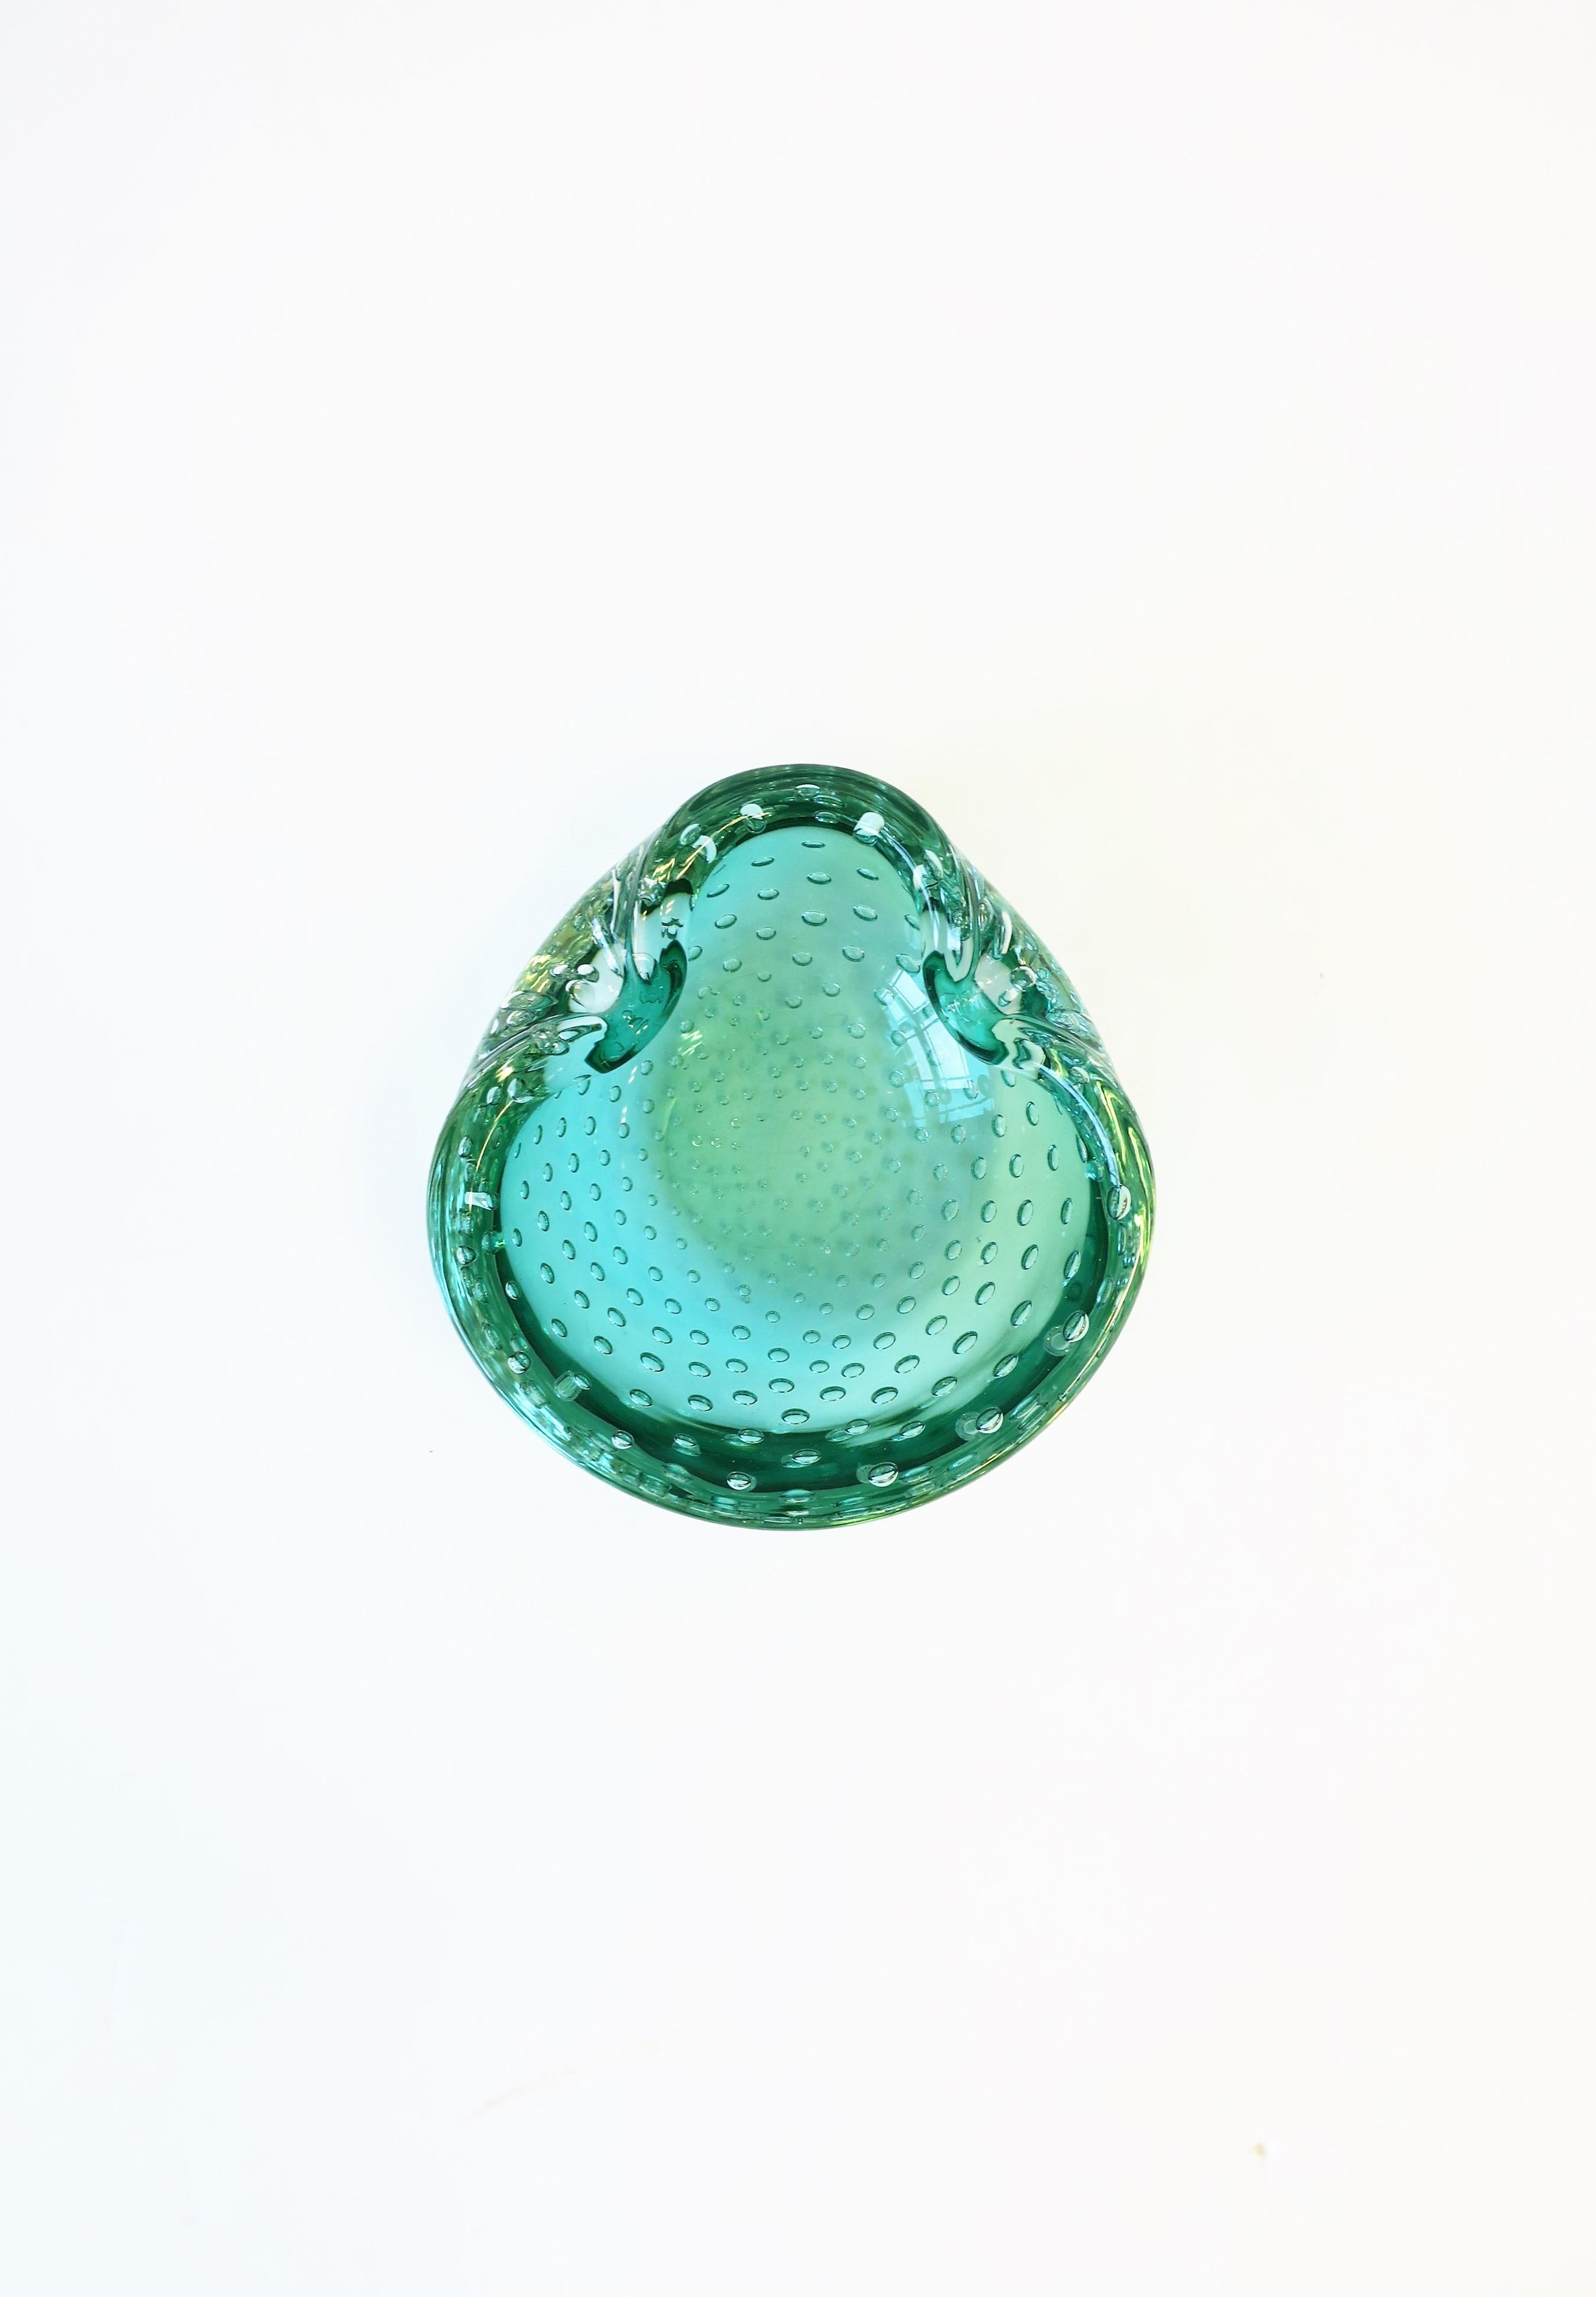 A beautiful Italian Murano art glass bowl with a controlled bubble design, after designer Alfredo Barbini, circa late 20th century, Italy. Bowl measures: 2.25